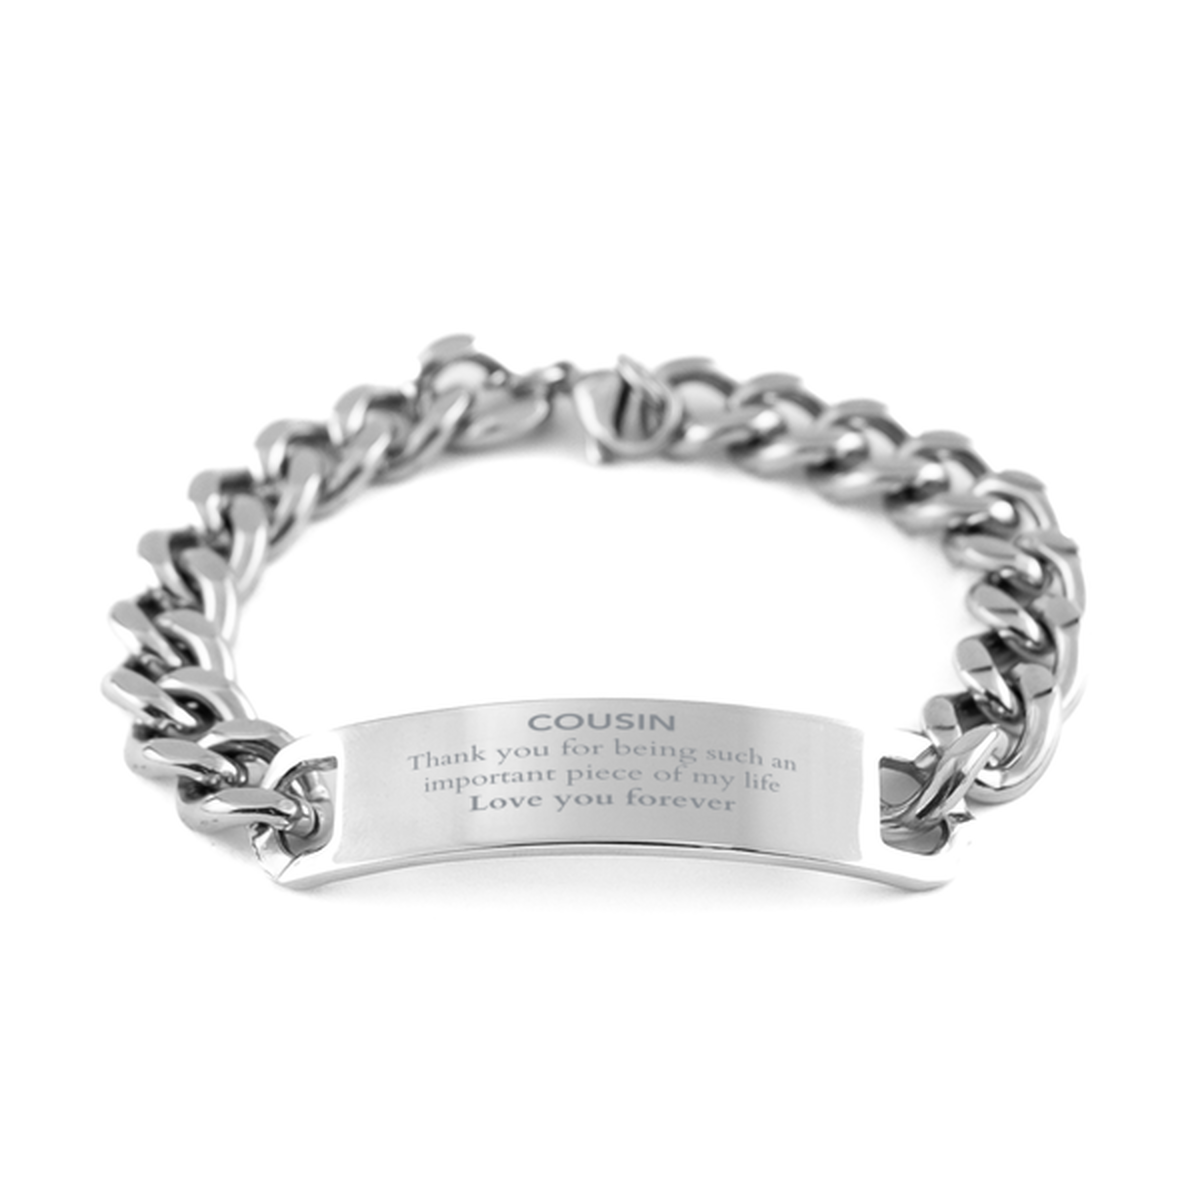 Appropriate Cousin Cuban Chain Stainless Steel Bracelet Epic Birthday Gifts for Cousin Thank you for being such an important piece of my life Cousin Christmas Mothers Fathers Day